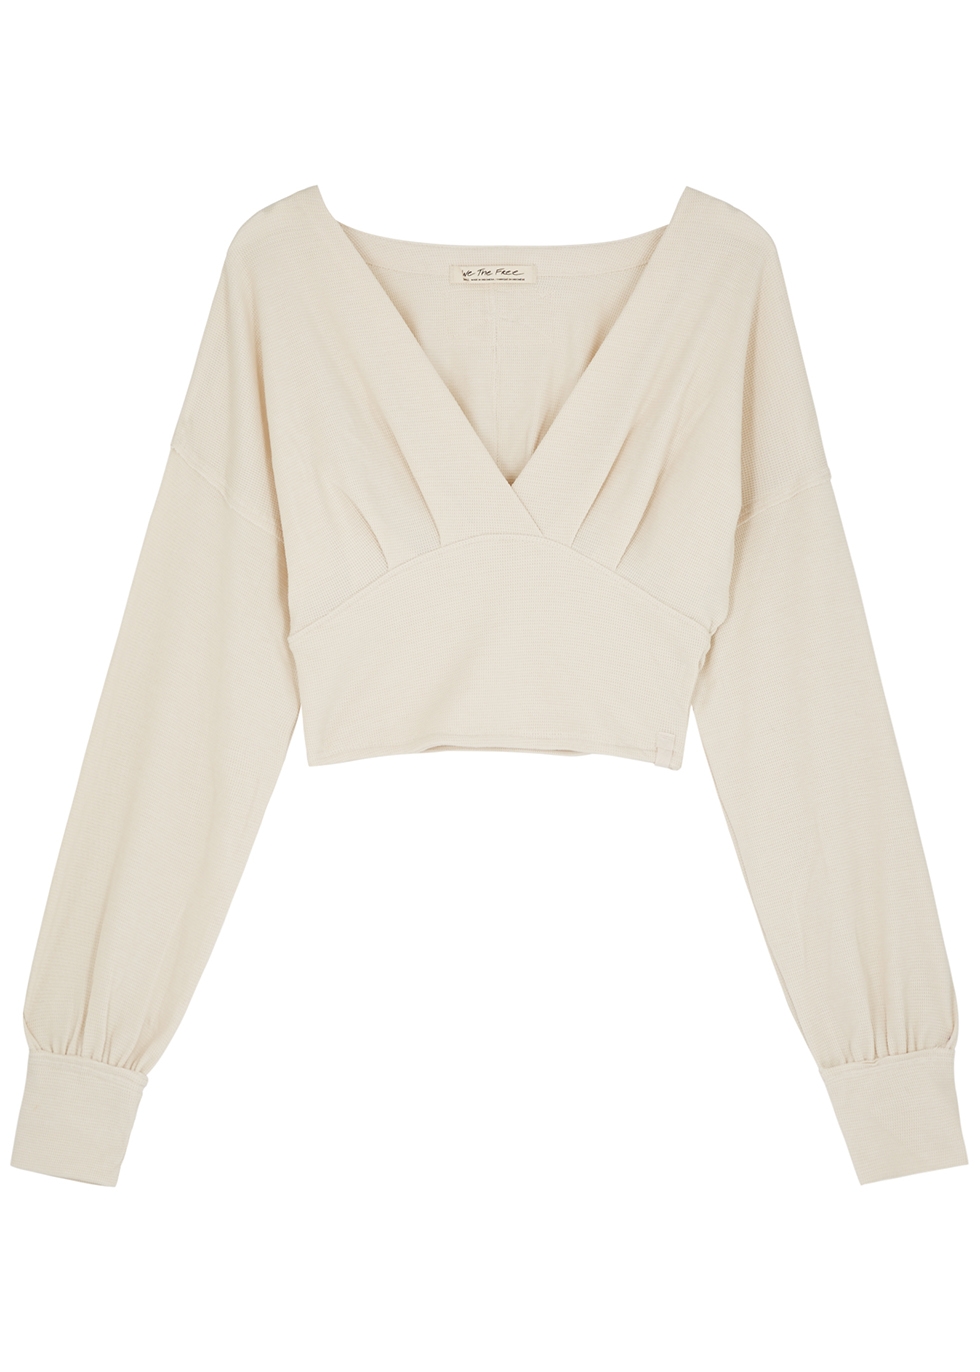 Free People All Nighter ivory jersey top